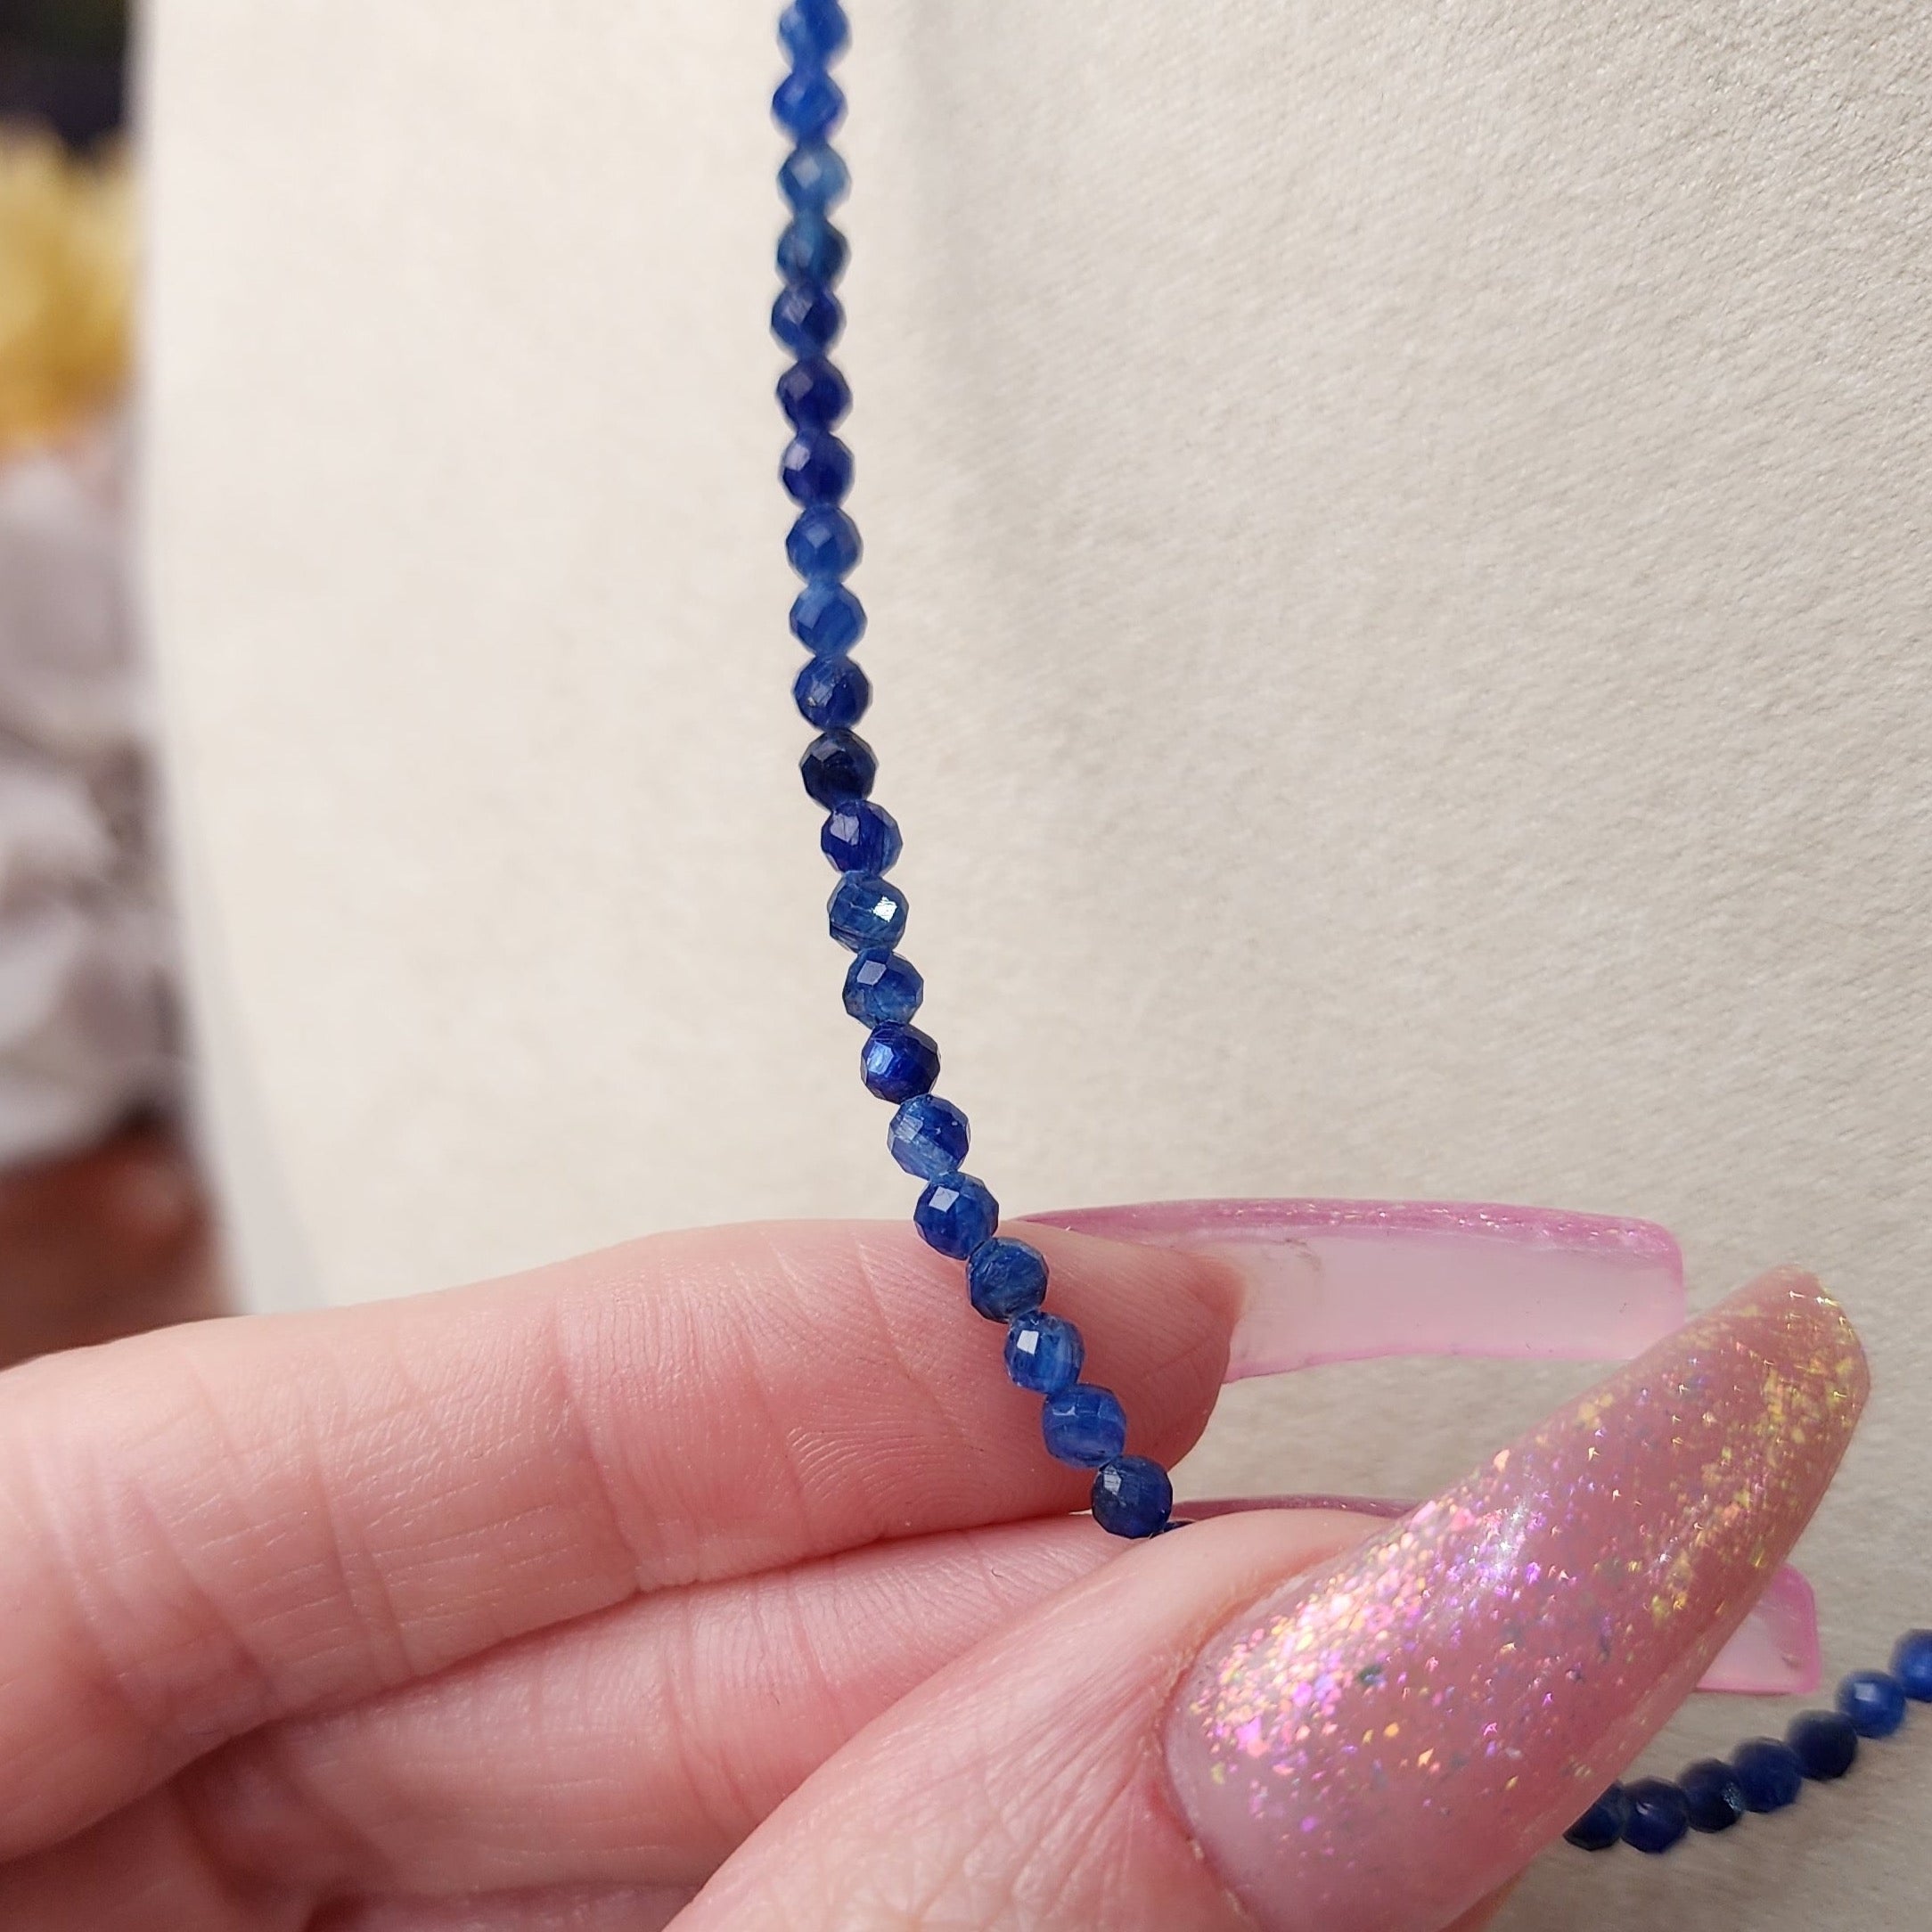 Kyanite Micro Faceted Necklace for Harmony and Overcoming Bad Habits